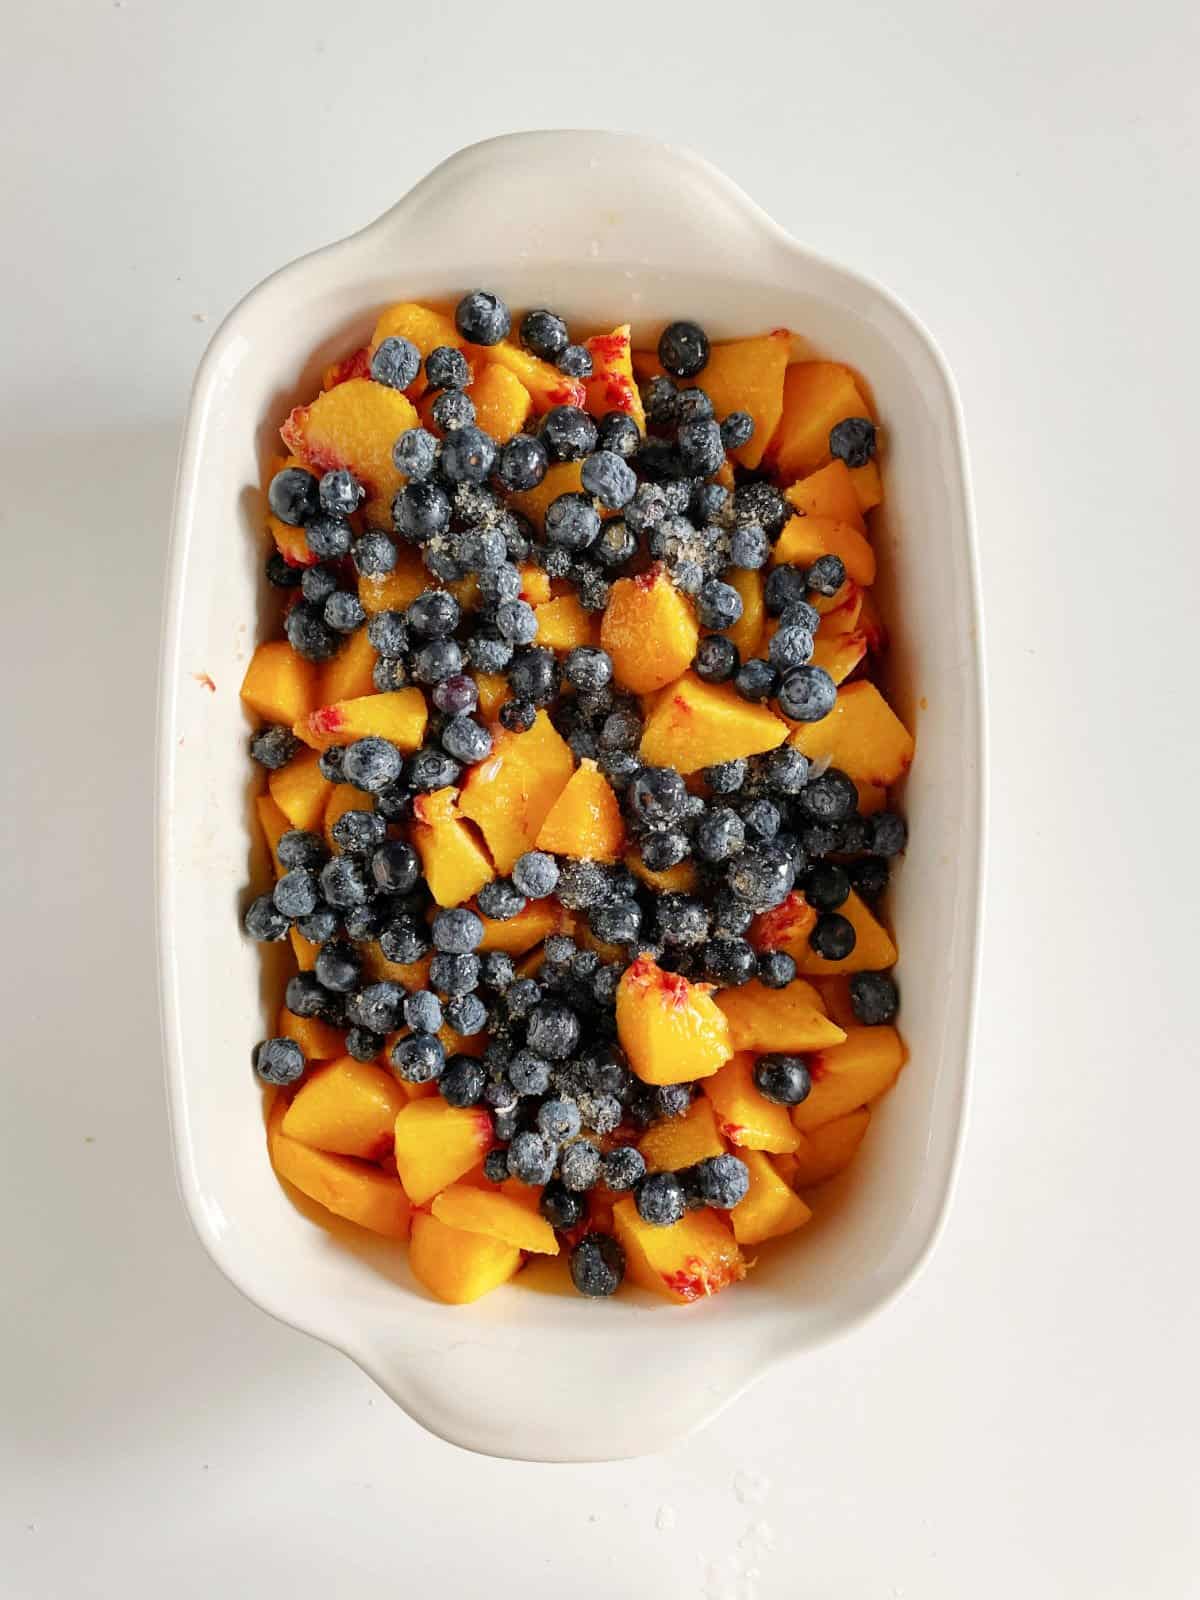 Peaches and blueberries in whitish rectangular ceramic dish on a white surface.